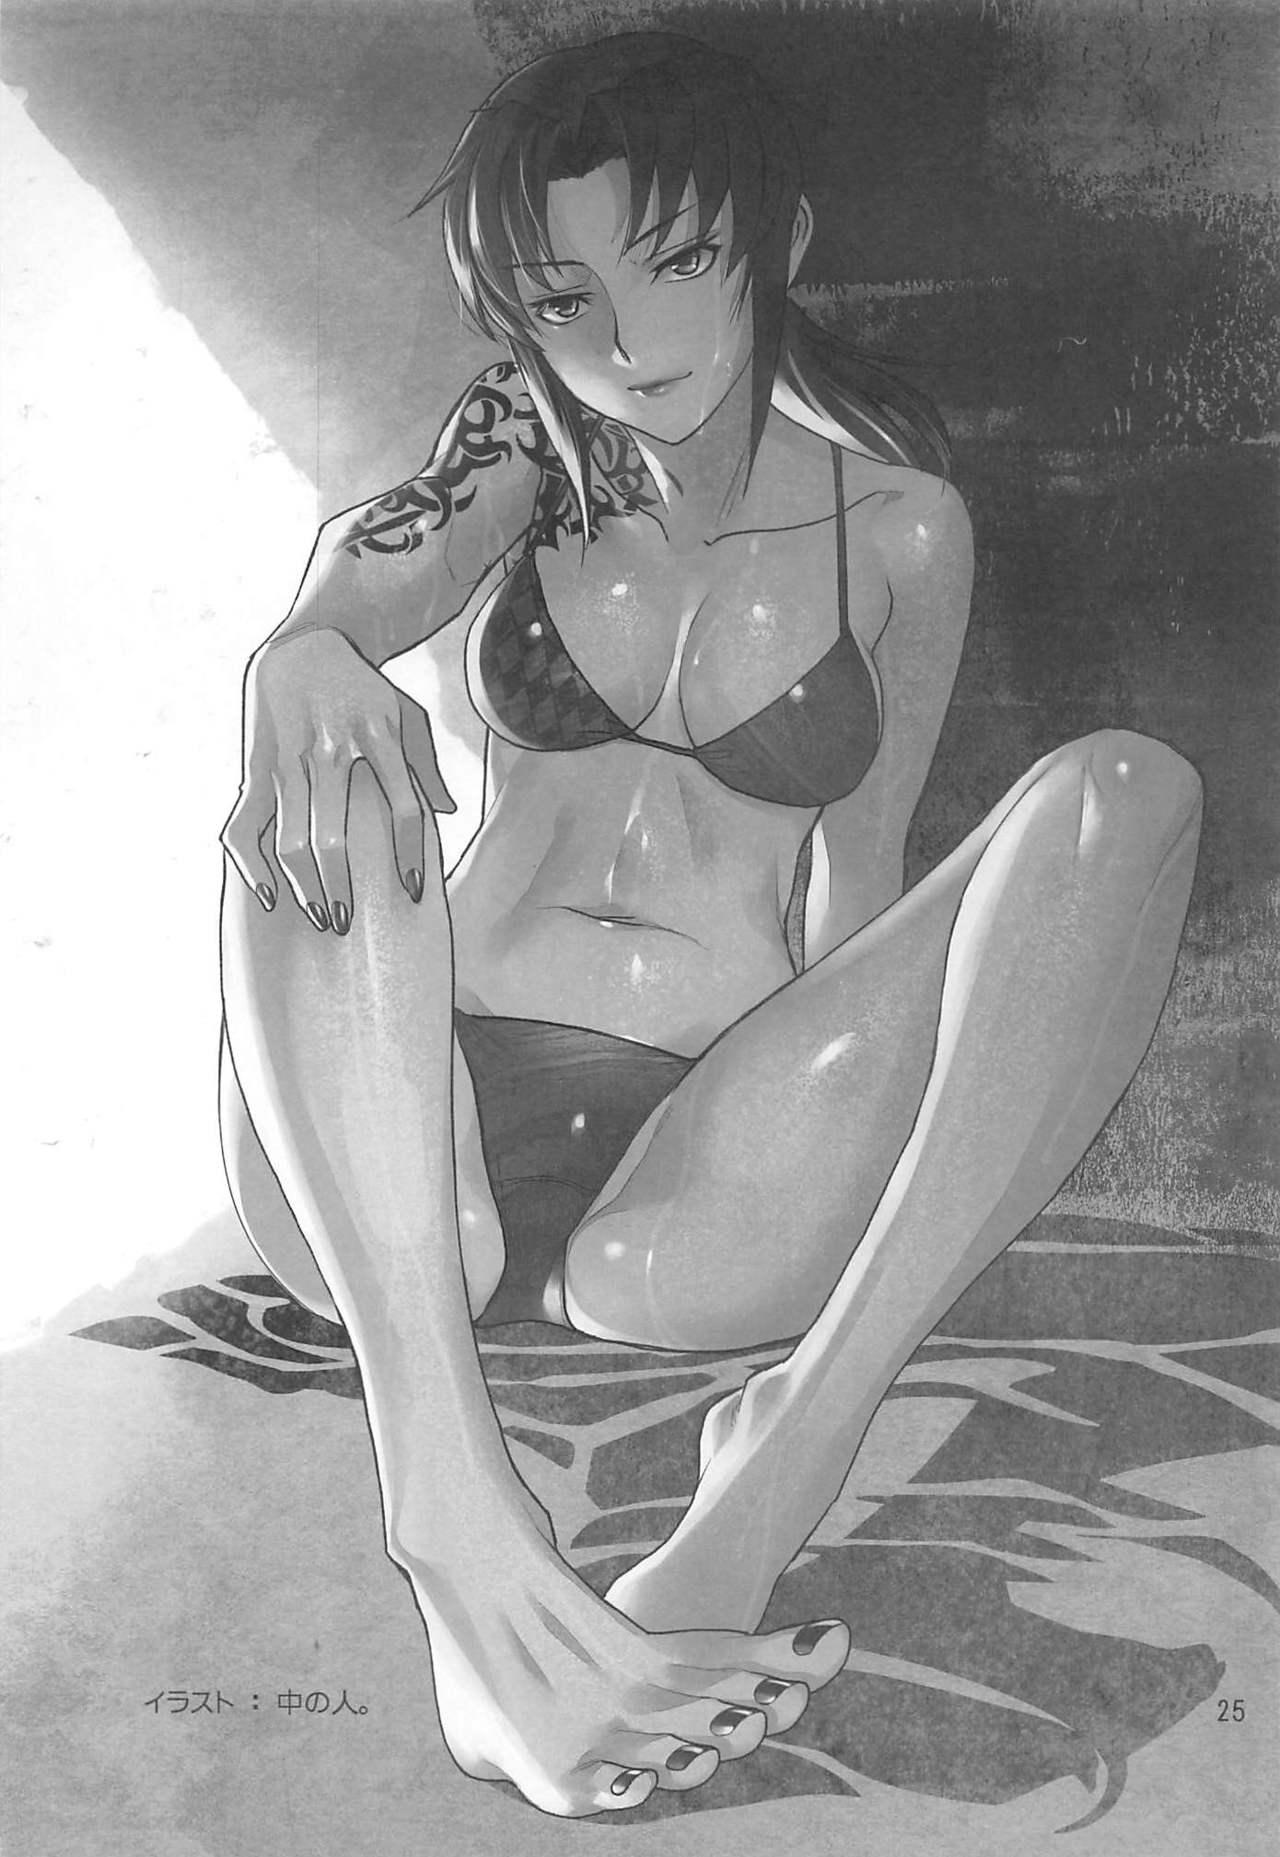 Gros Seins Honeoridoku - I can't use my hands - Black lagoon Sologirl - Page 24